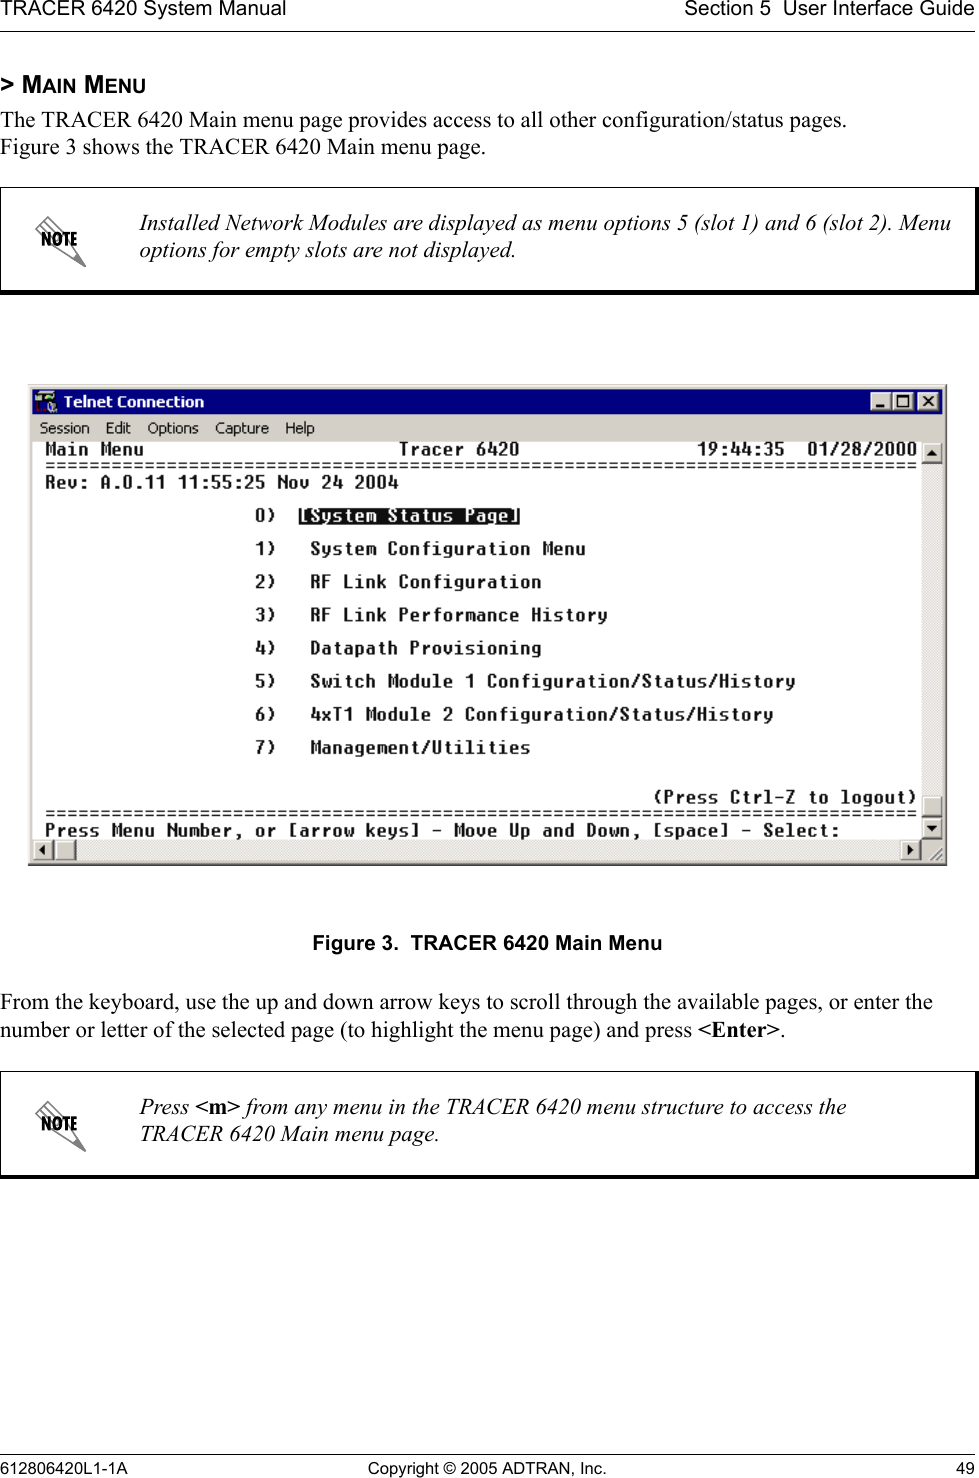 TRACER 6420 System Manual Section 5  User Interface Guide612806420L1-1A Copyright © 2005 ADTRAN, Inc. 49&gt; MAIN MENUThe TRACER 6420 Main menu page provides access to all other configuration/status pages.  Figure 3 shows the TRACER 6420 Main menu page.Figure 3.  TRACER 6420 Main MenuFrom the keyboard, use the up and down arrow keys to scroll through the available pages, or enter the number or letter of the selected page (to highlight the menu page) and press &lt;Enter&gt;.Installed Network Modules are displayed as menu options 5 (slot 1) and 6 (slot 2). Menu options for empty slots are not displayed.Press &lt;m&gt; from any menu in the TRACER 6420 menu structure to access the TRACER 6420 Main menu page.